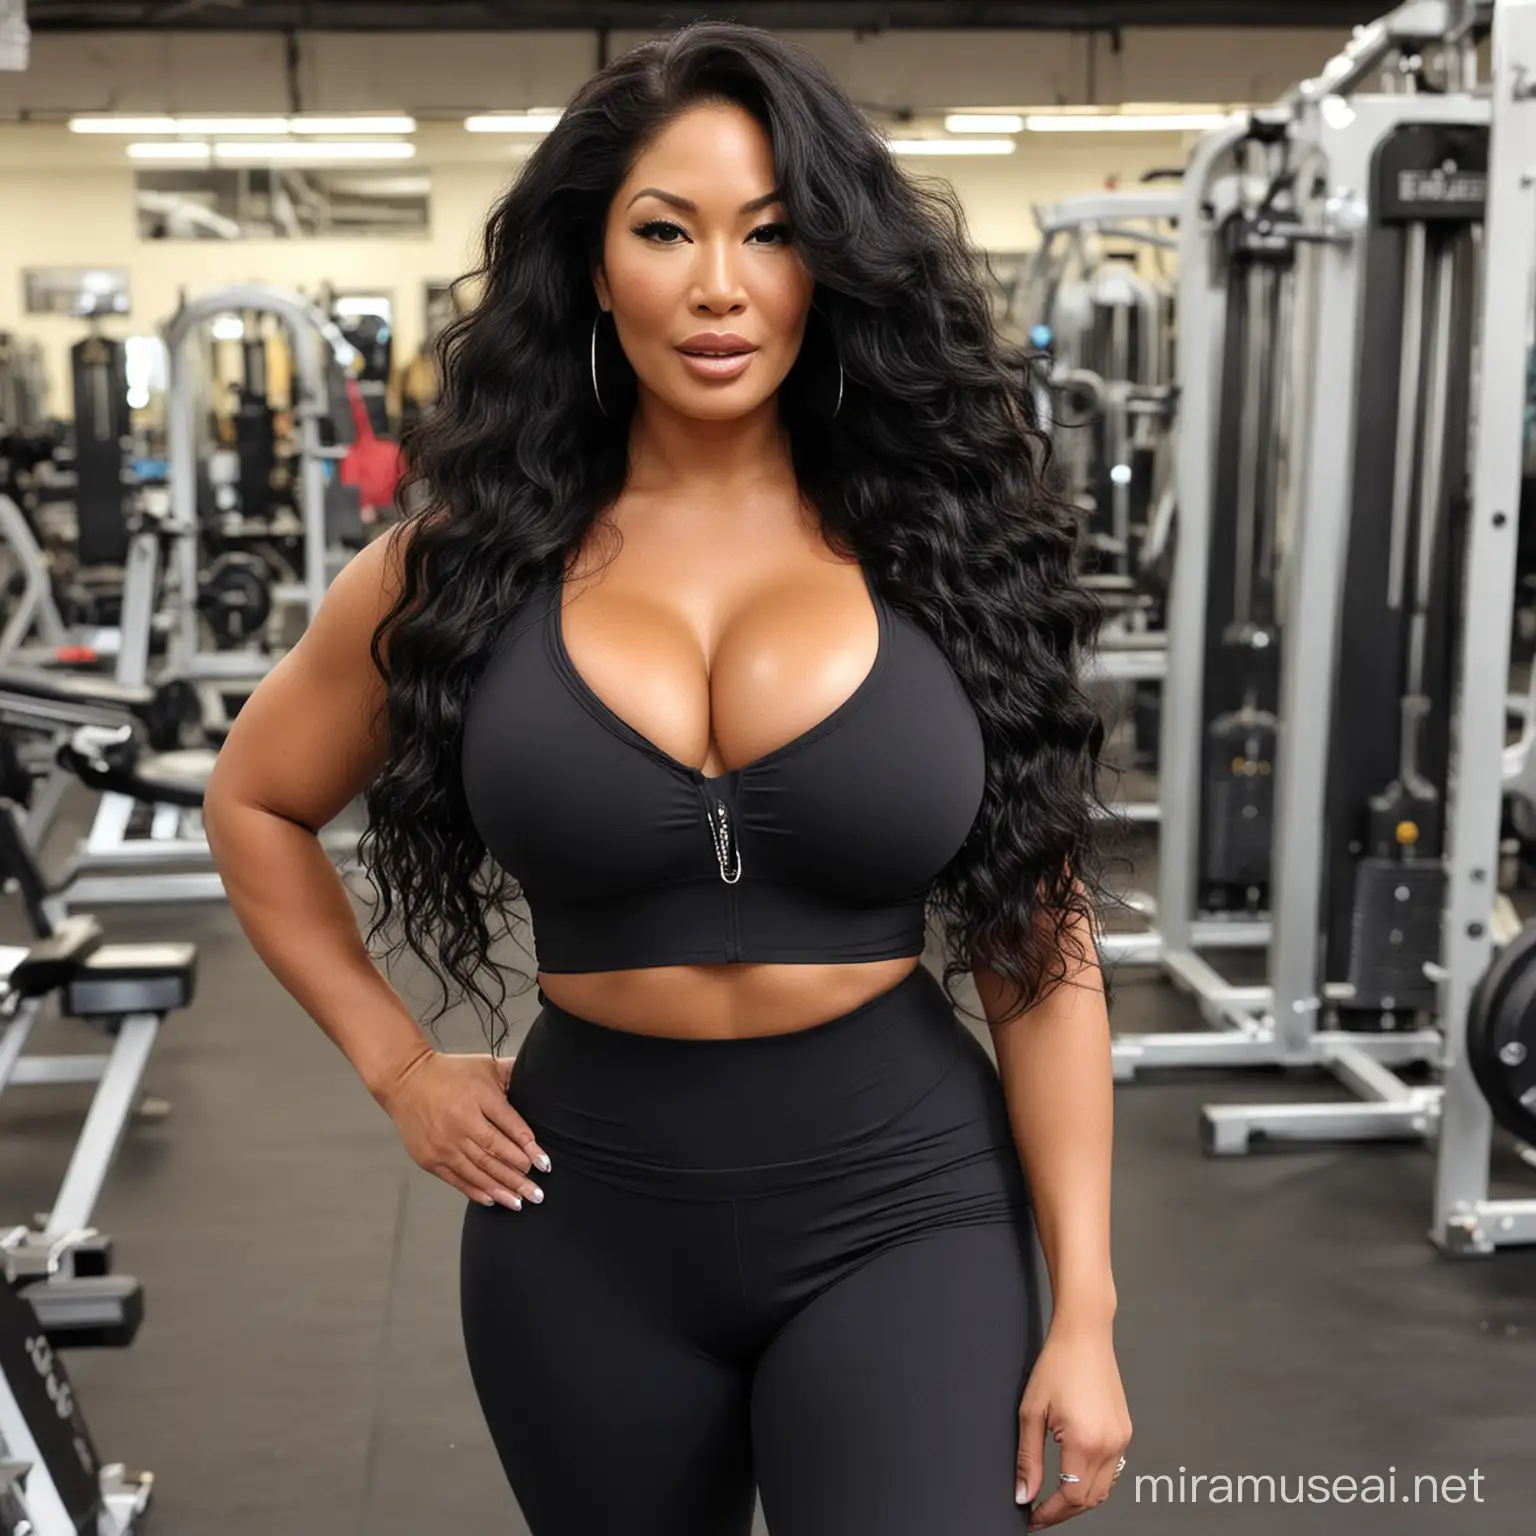 Kimora Lee Simmons Exercising with Bold Style and Curves